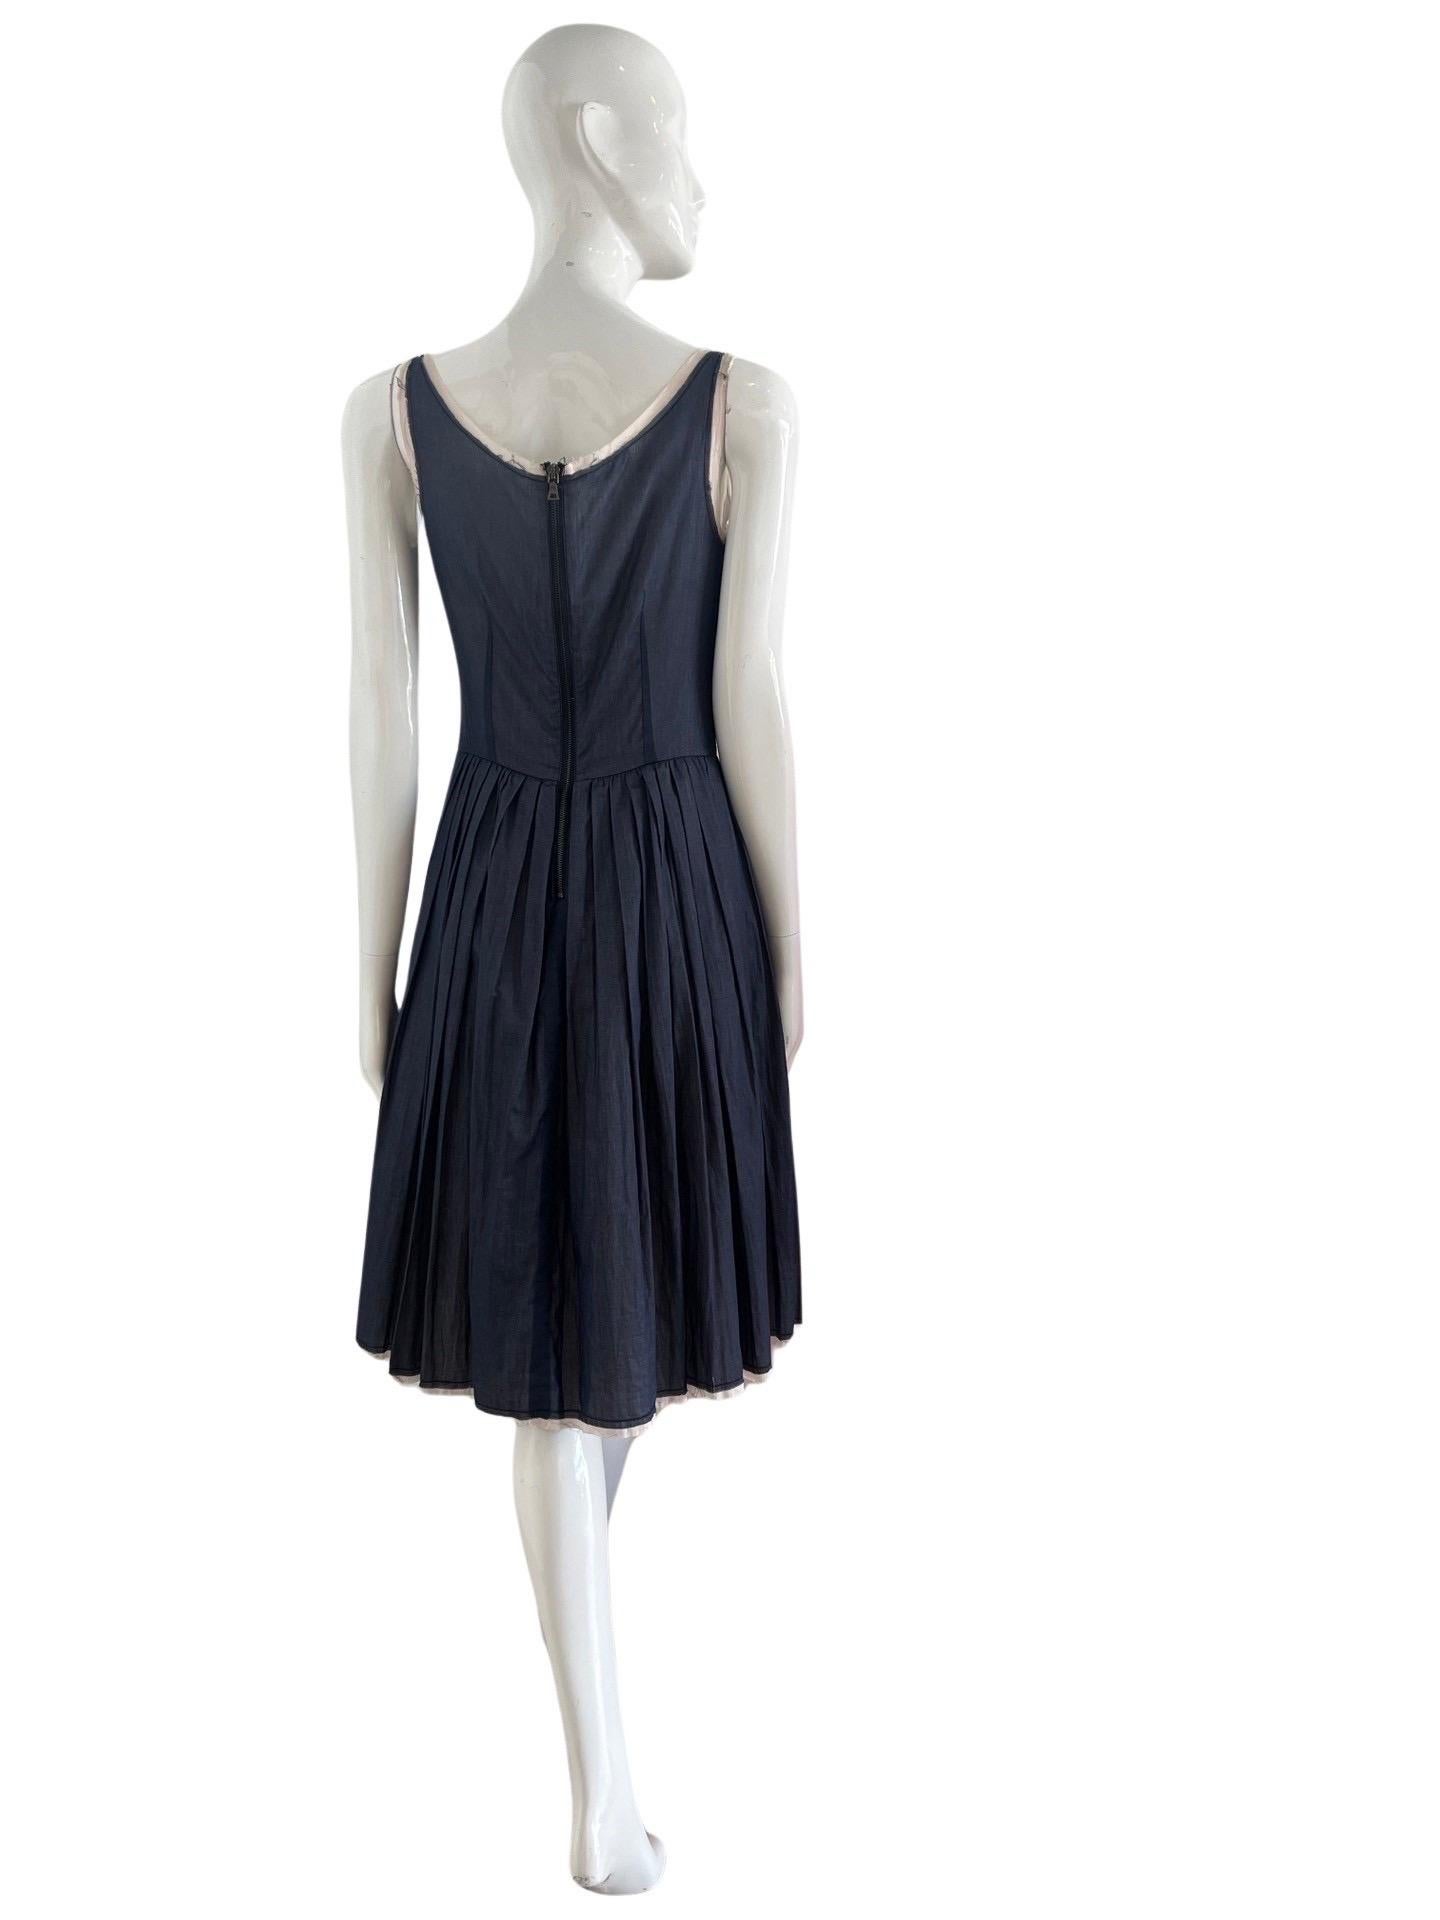 Prada Sport Chambray Pleated Dress For Sale 3